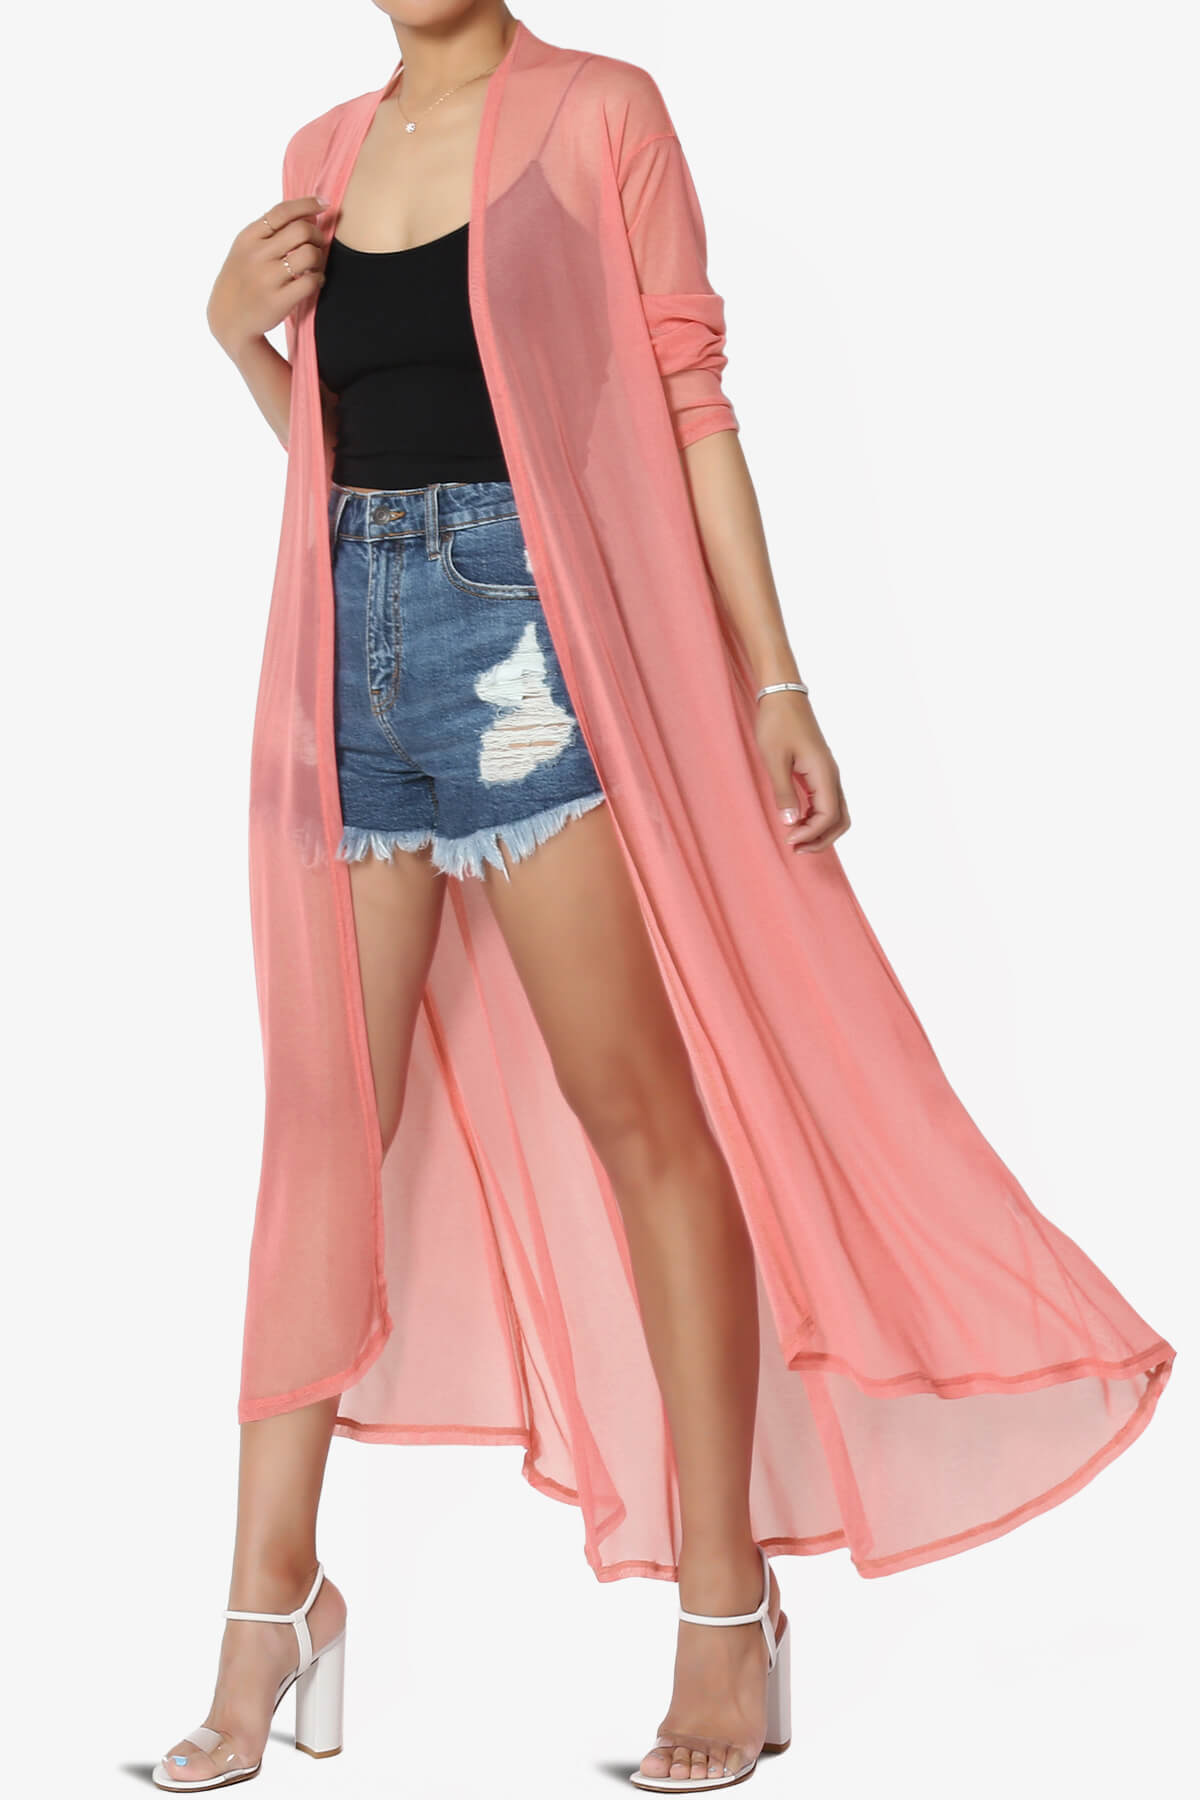 Moxxi Sheer Mesh Open Cardigan Duster CORAL_3